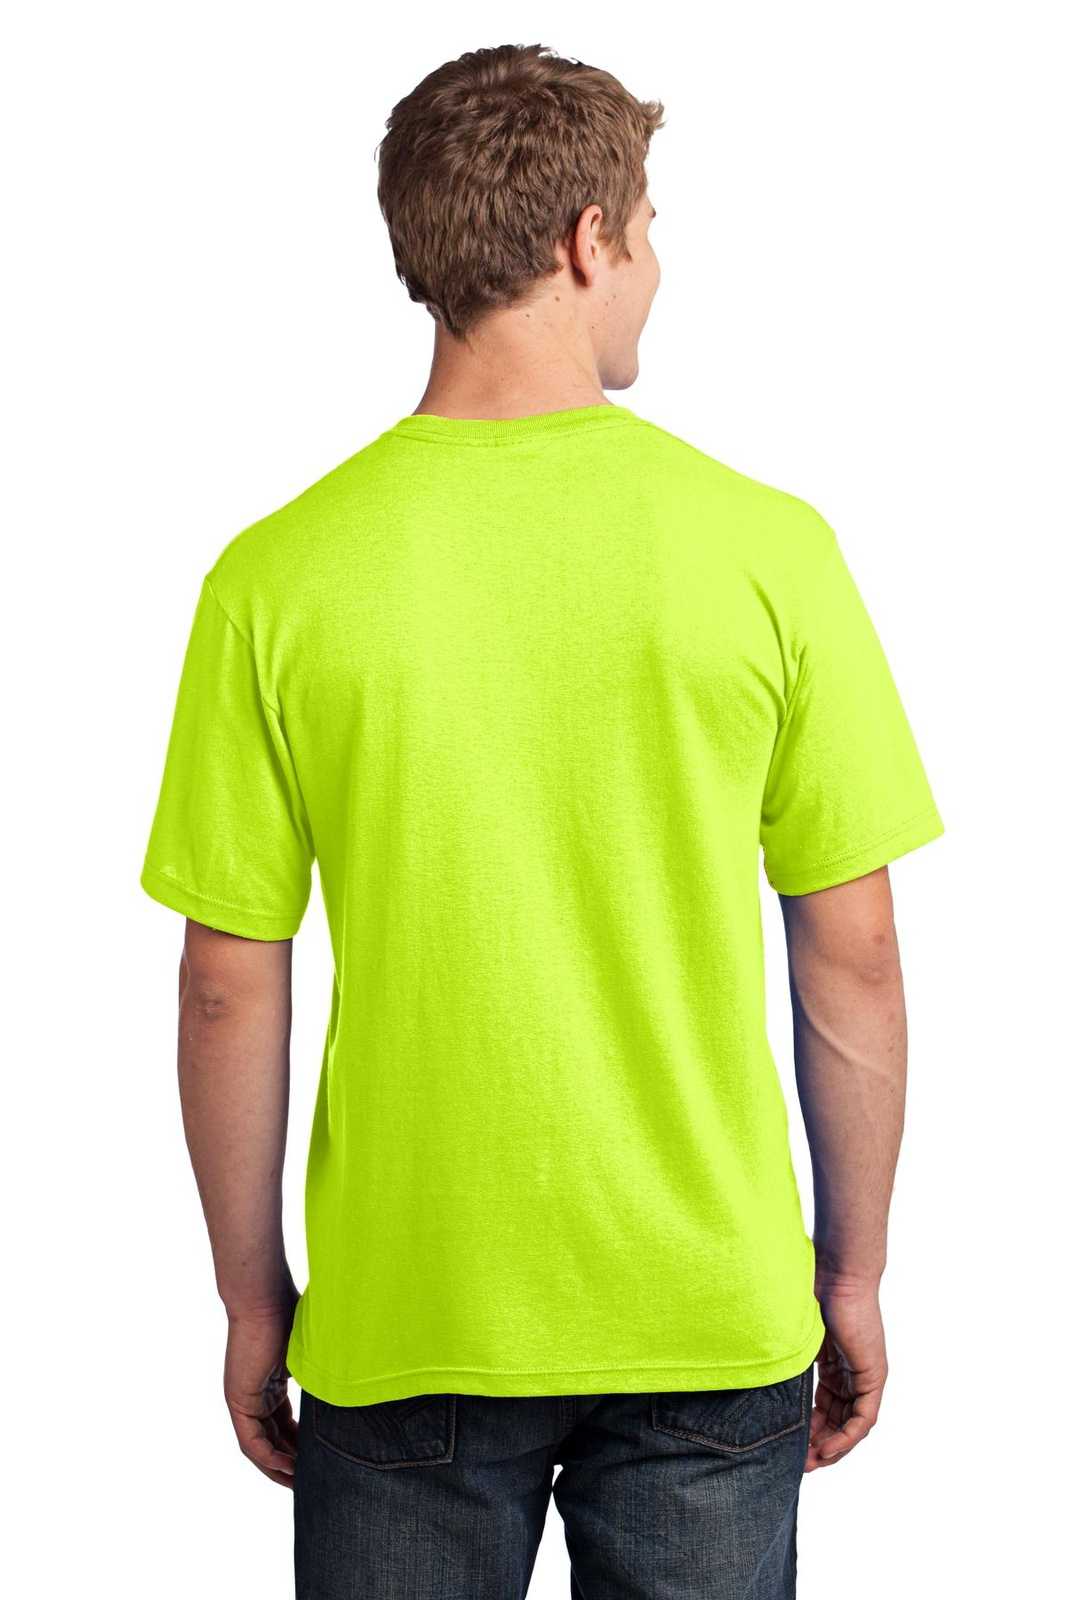 Port &amp; Company USA100P All-American Pocket Tee - Safety Green - HIT a Double - 2